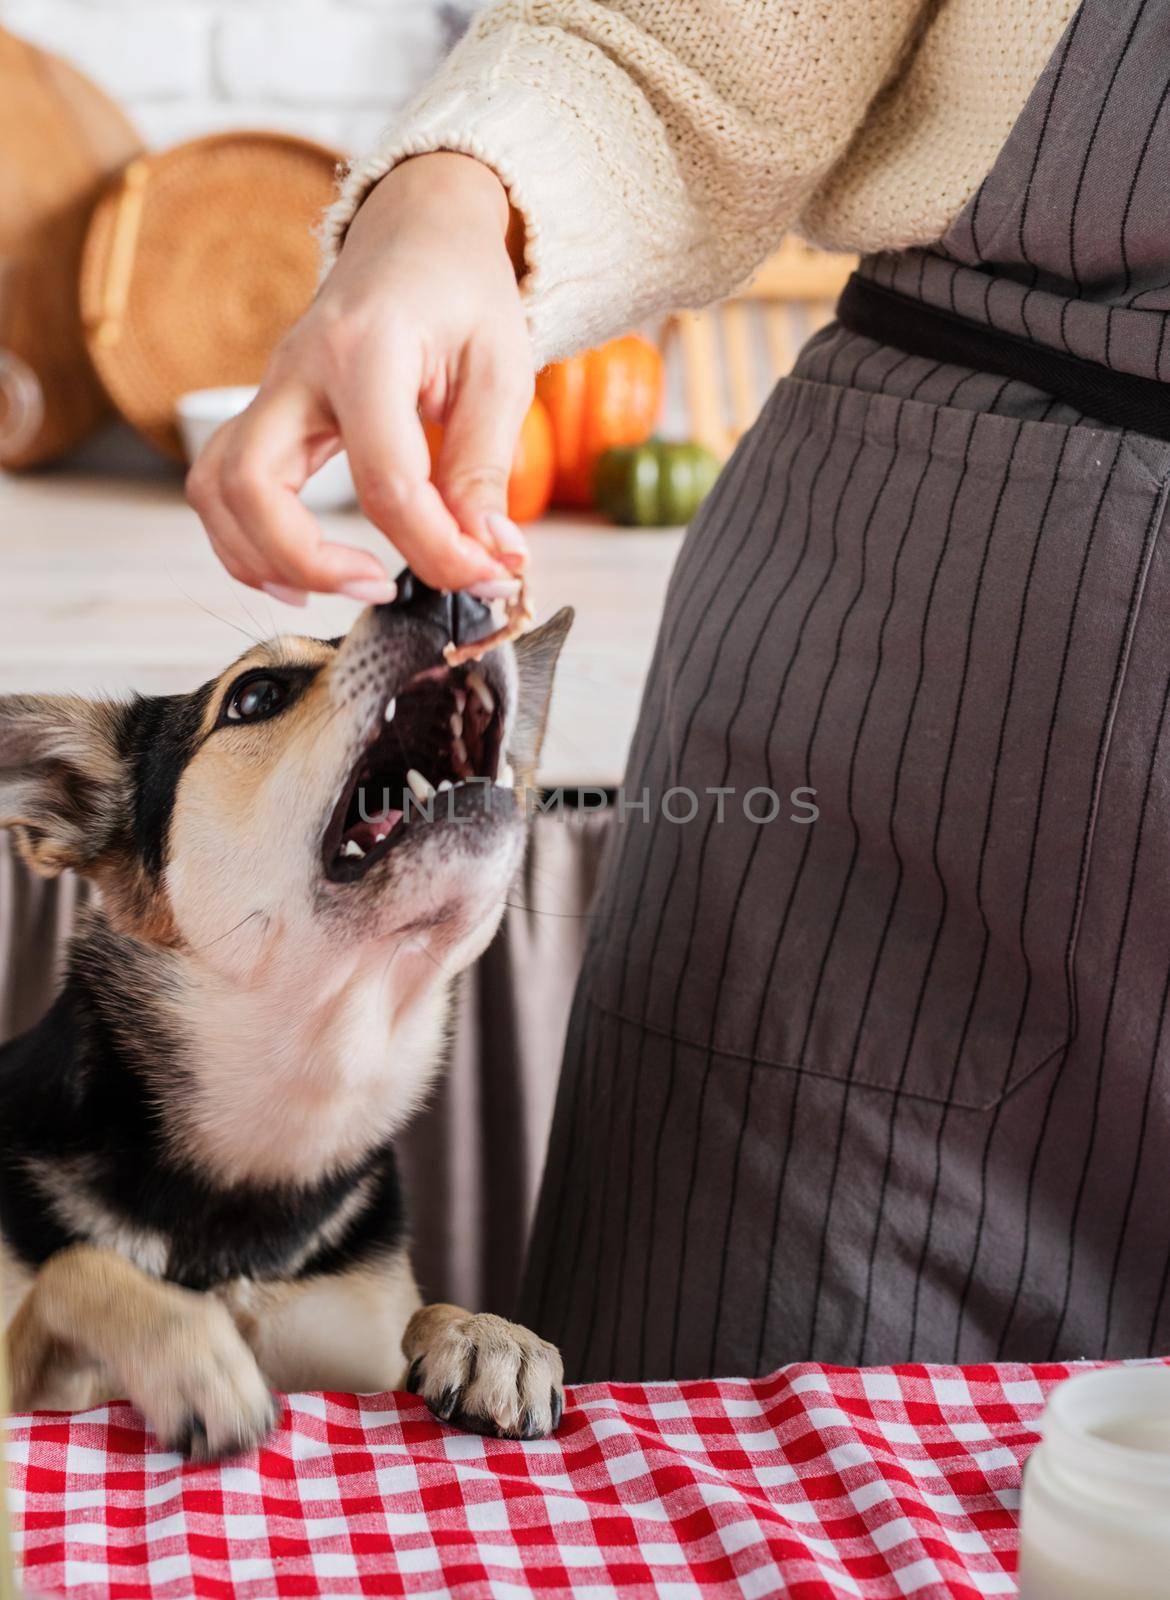 Happy Thanksgiving Day. Autumn feast. Animal allergy. Woman celebrating holiday cooking traditional dinner at kitchen with turkey, giving her dog a piece to try